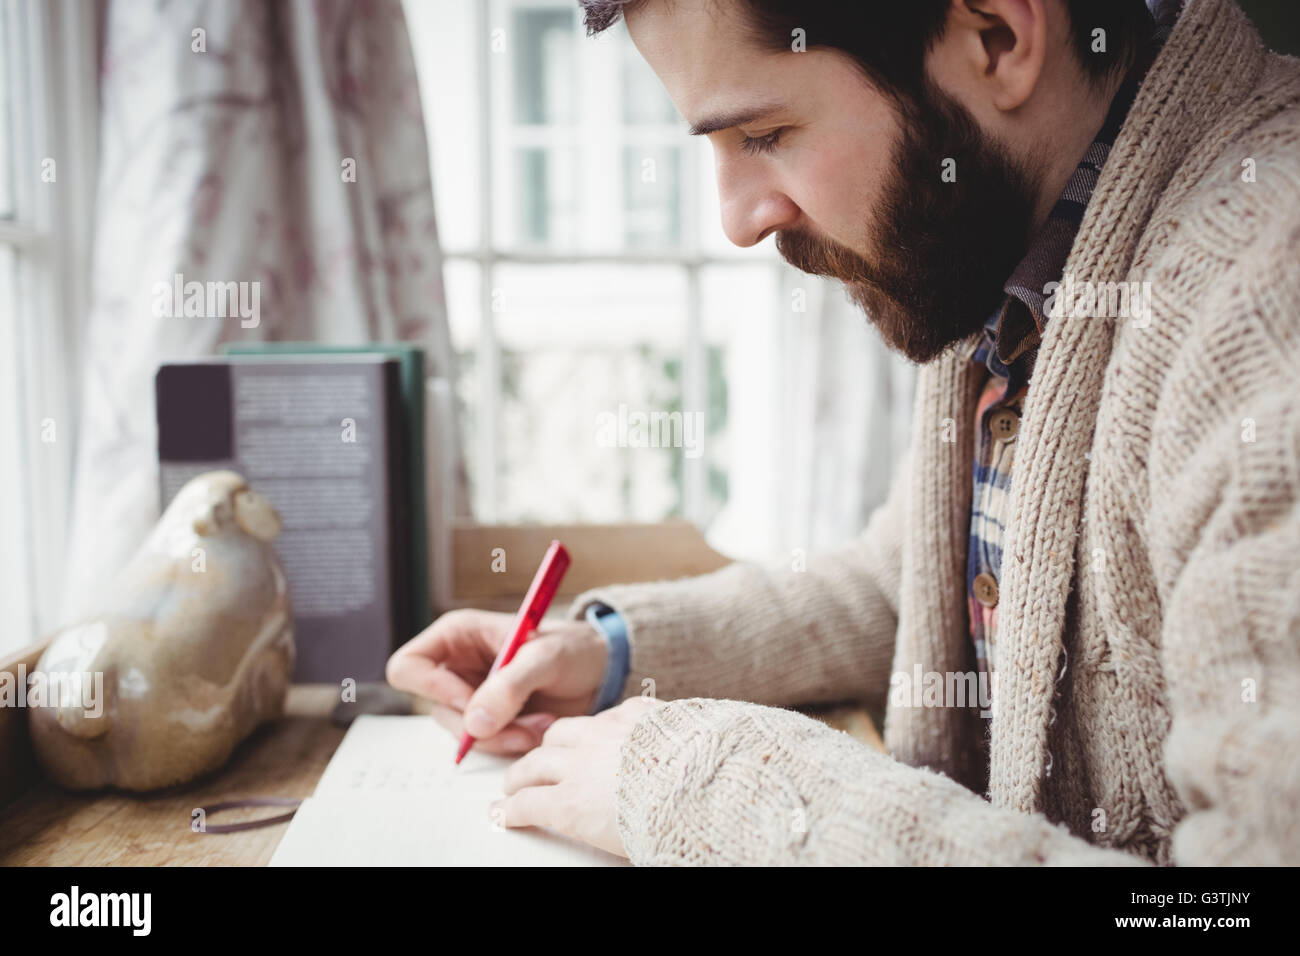 Profile of man writing in a notebook Stock Photo